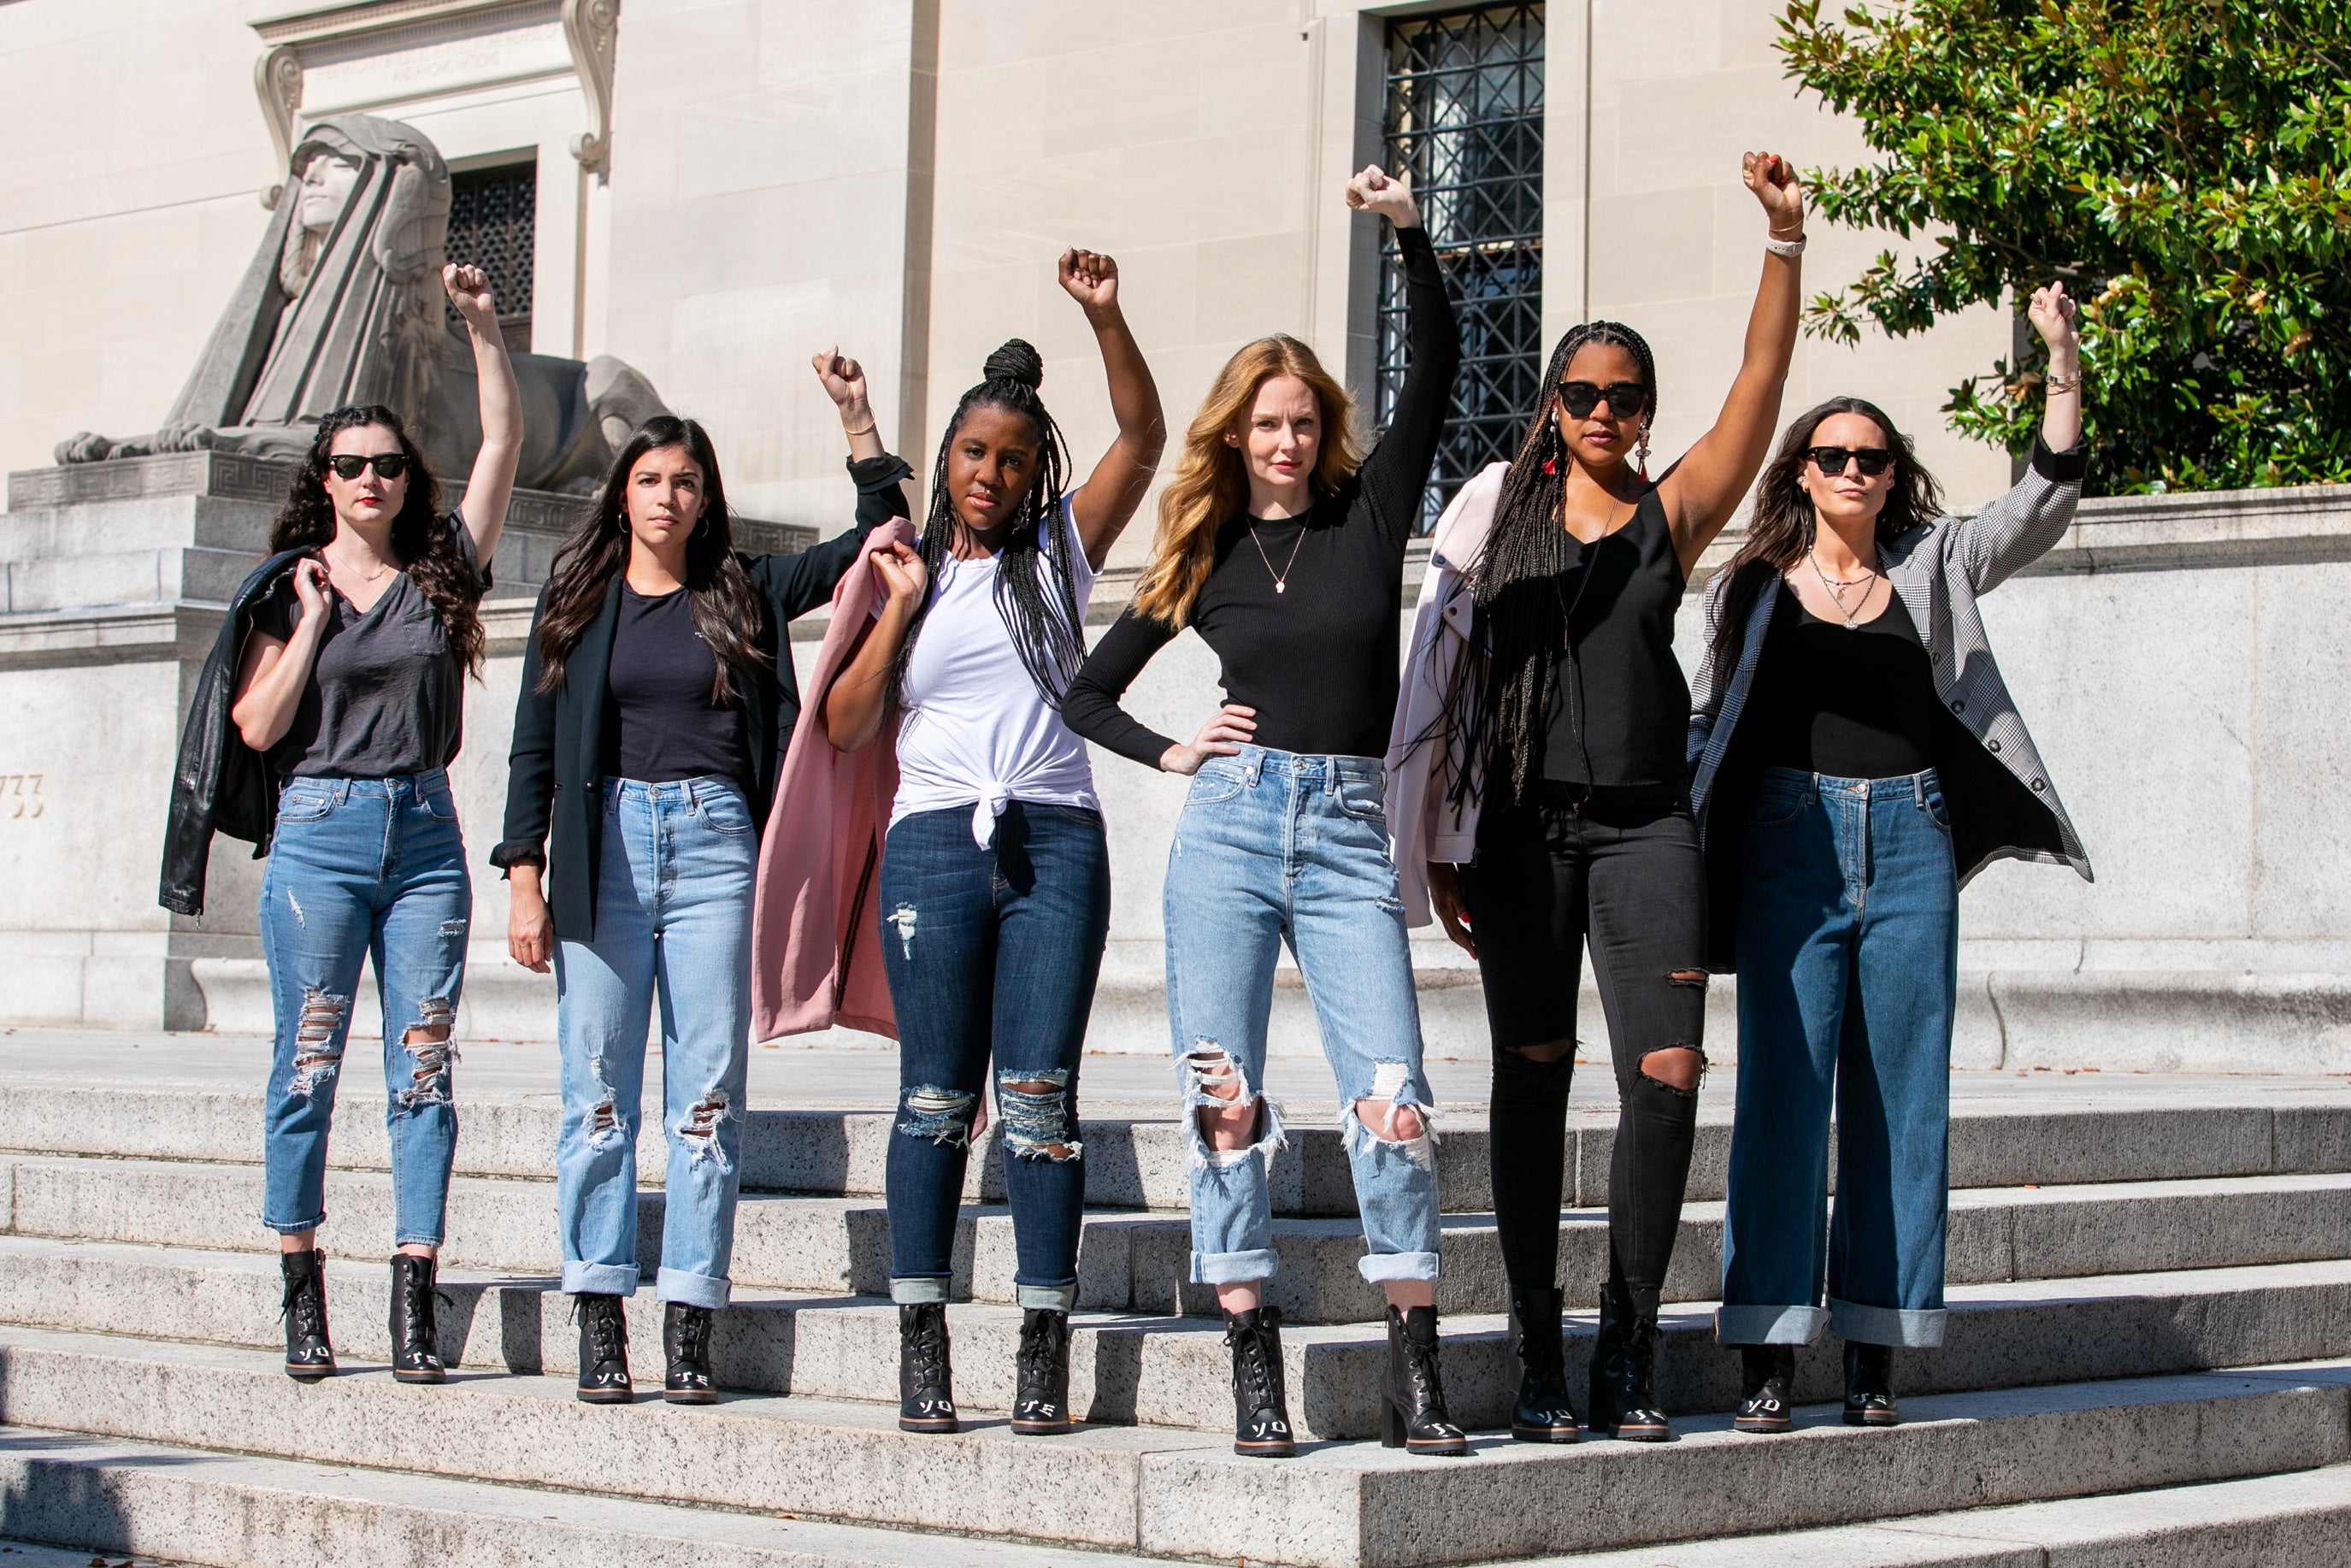 Six women stand on cement steps, all with fists raised in the air